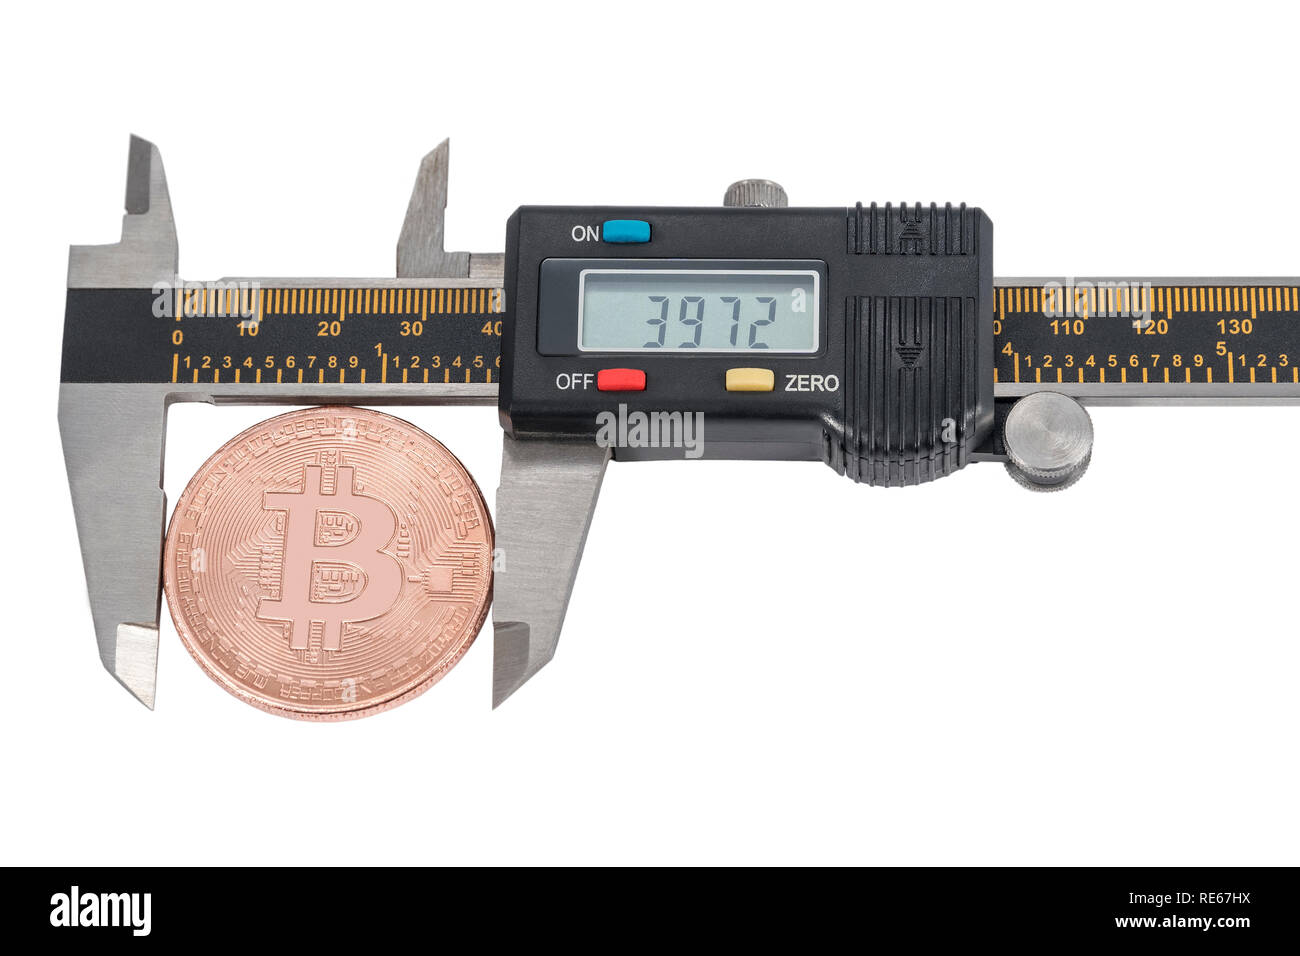 using a caliper to measure the price of bitcoin, isolated on white background Stock Photo